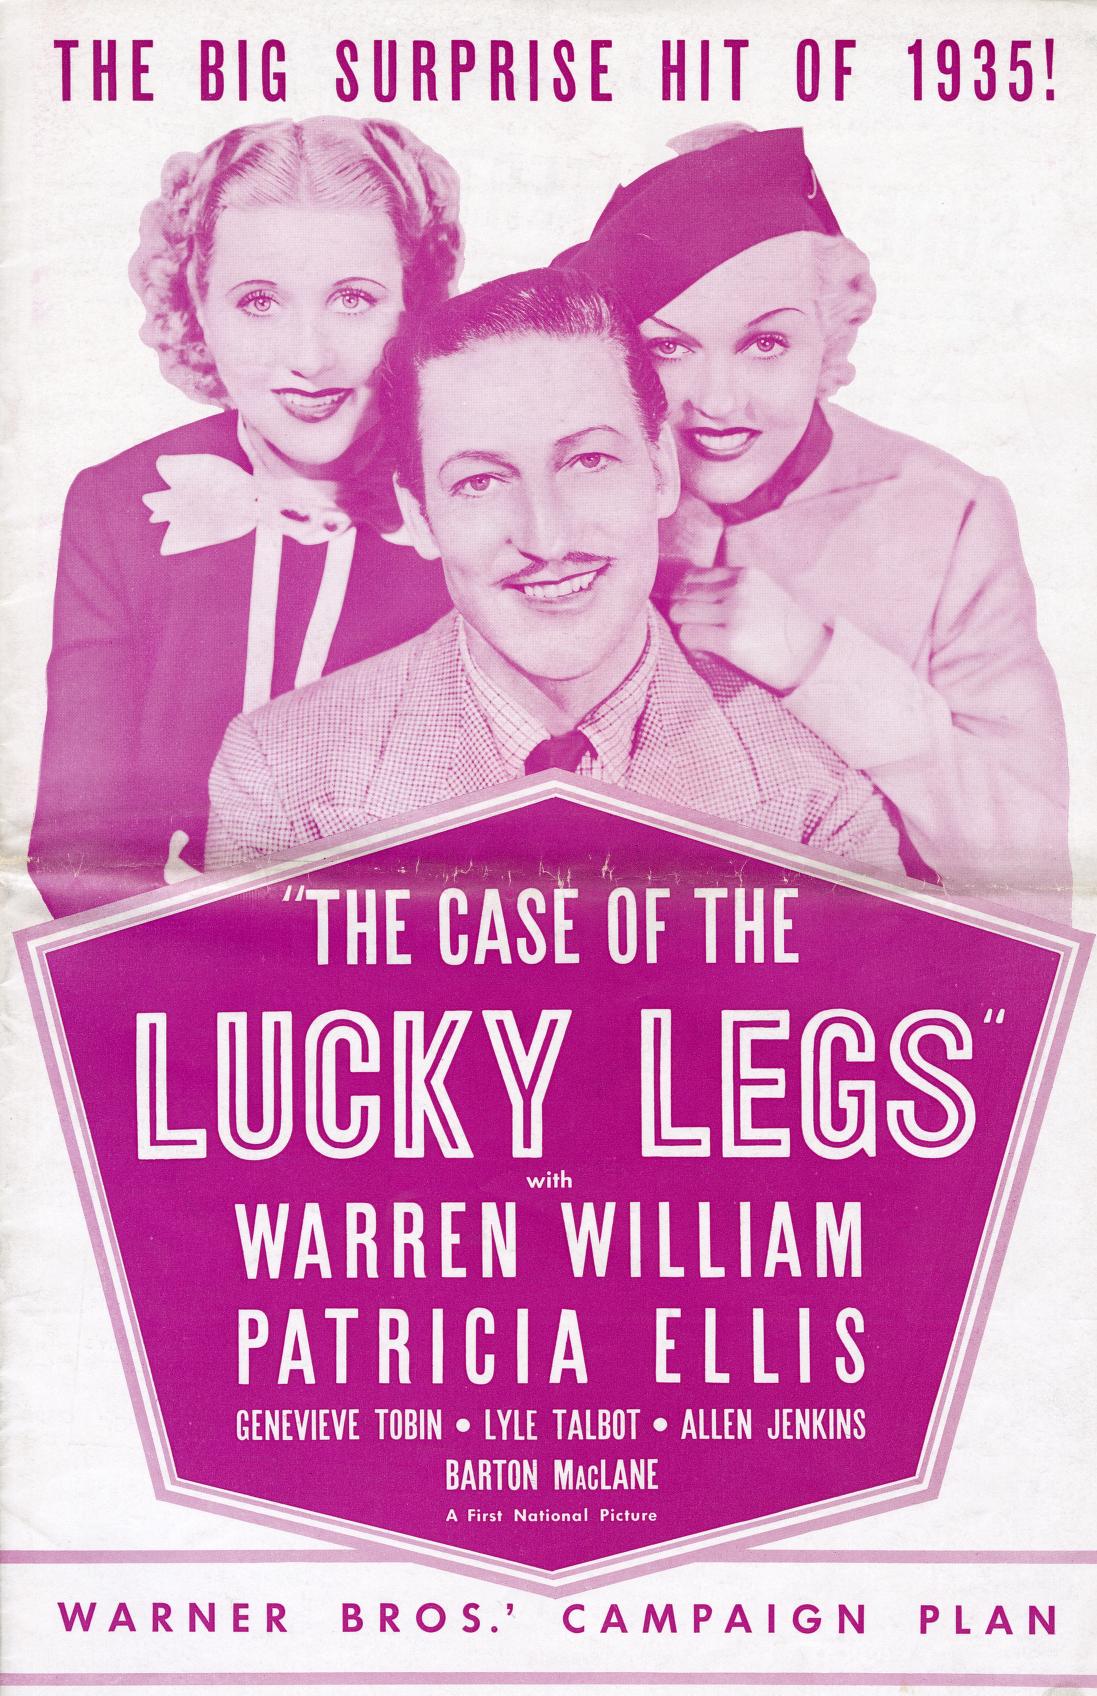 The Case of the Lucky Legs (Warner Bros.)